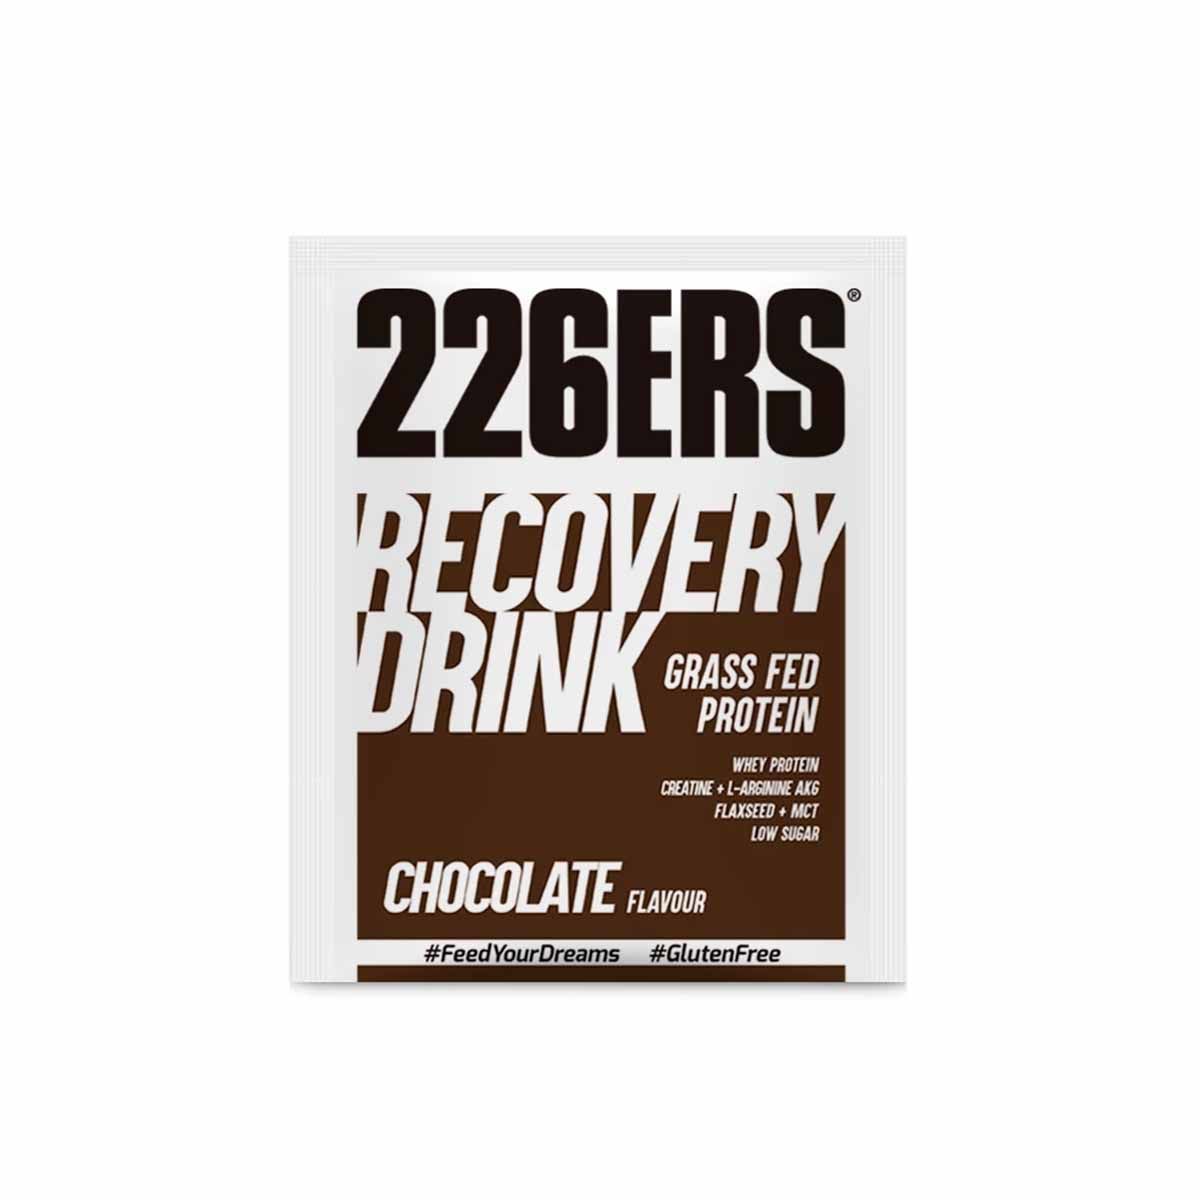 Recovery drink 226ers - Chocolate